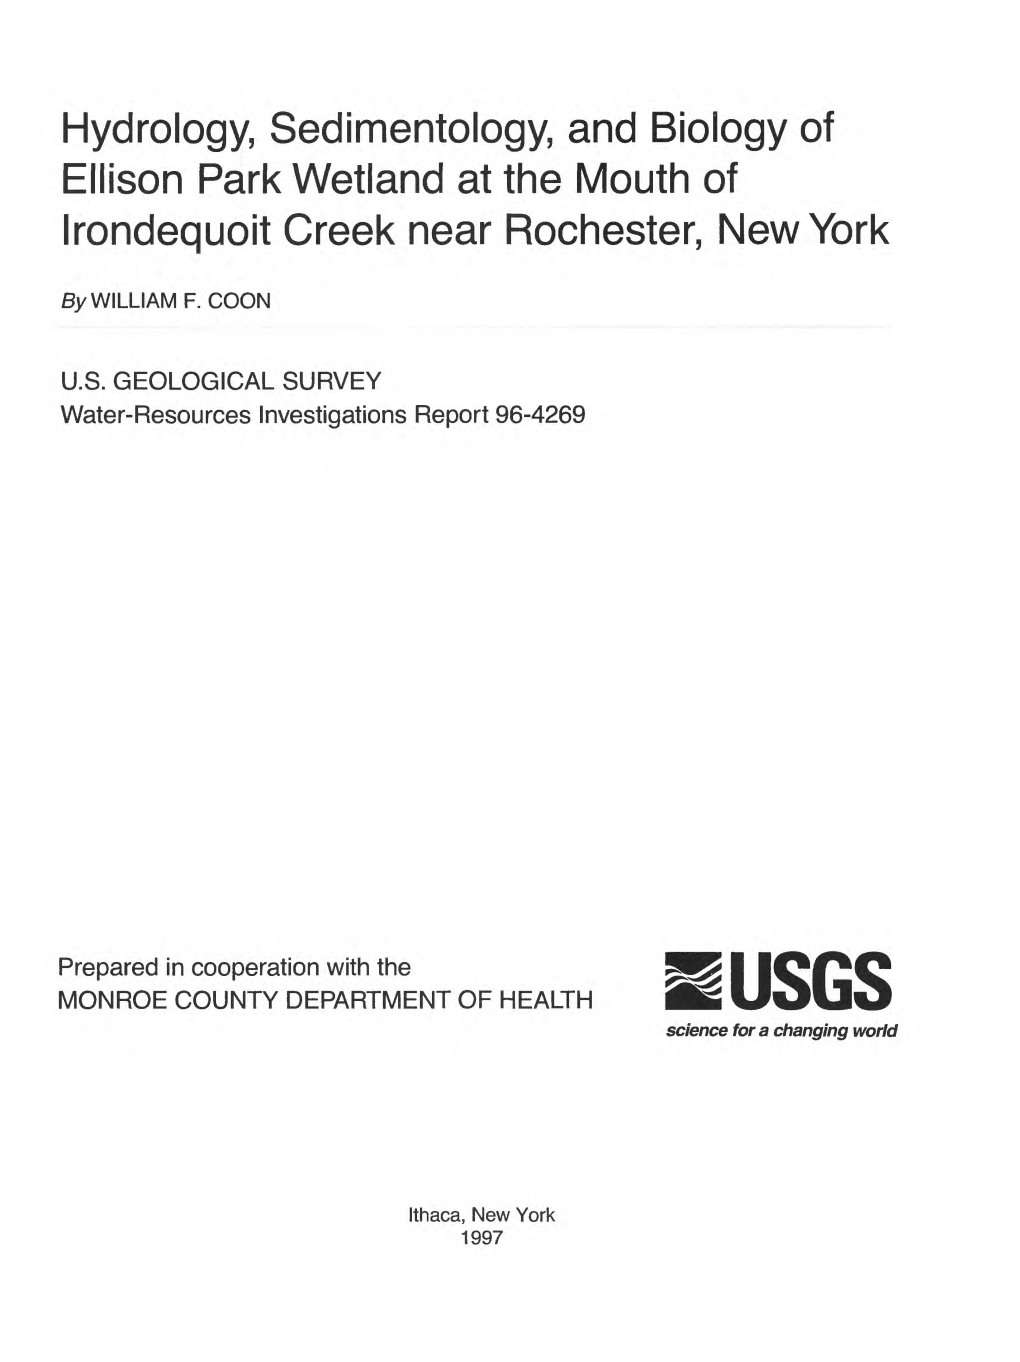 Hydrology, Sedimentology, and Biology of Ellison Park Wetland at the Mouth of Irondequoit Creek Near Rochester, New York